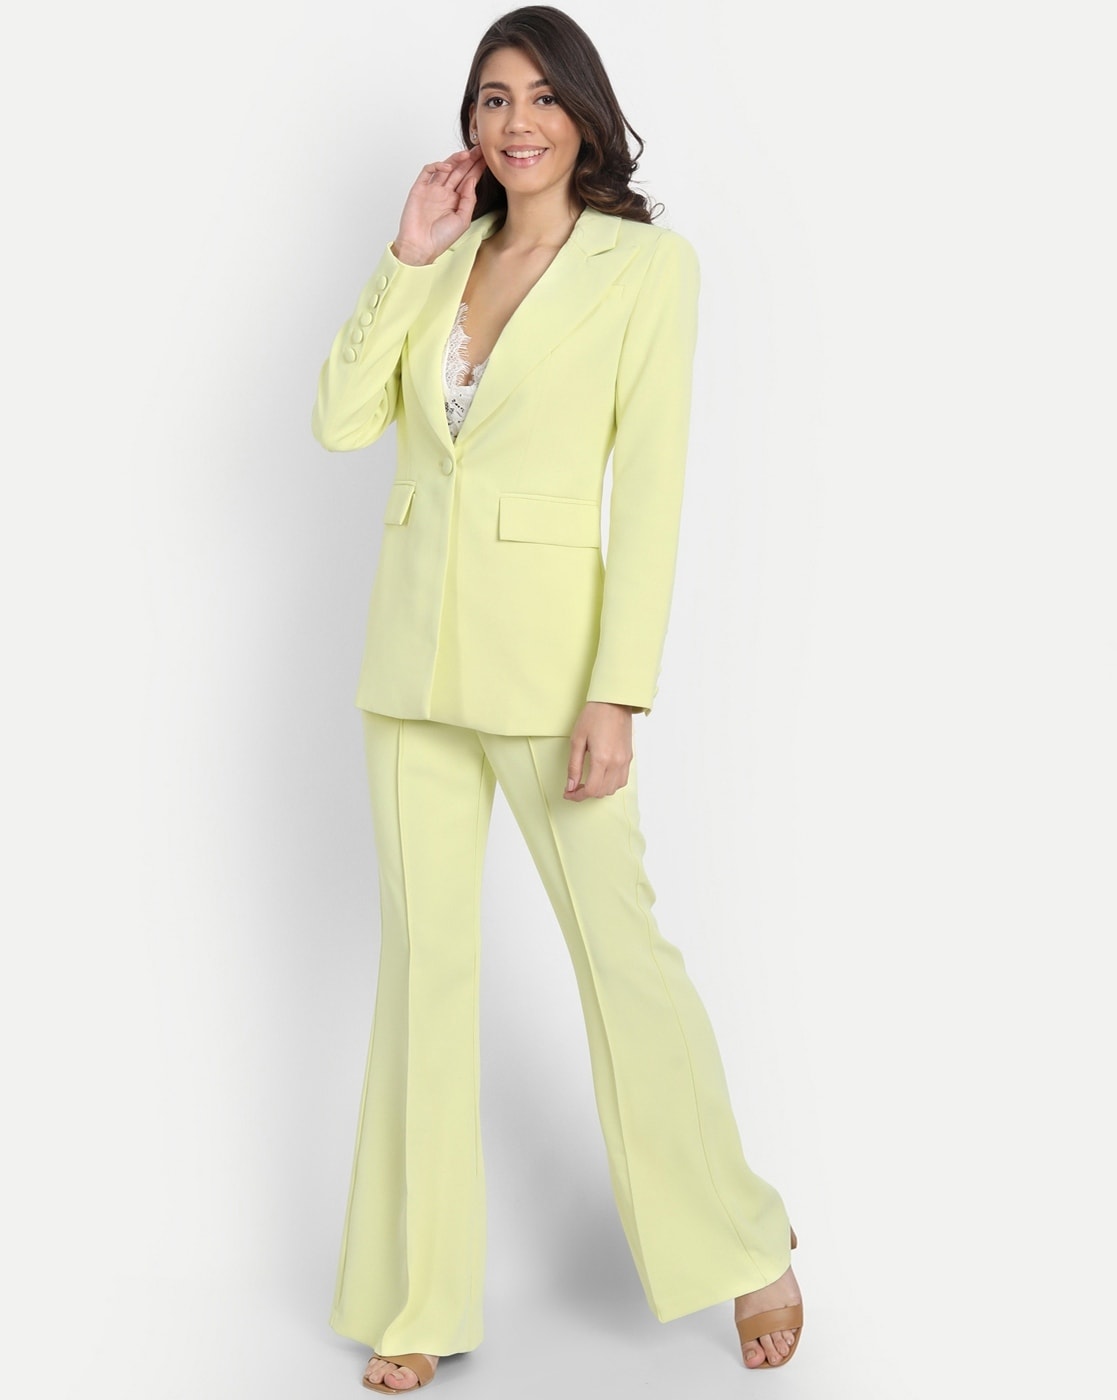 Formal Suits Blazer And Pants Set  YELLOW SUB TRADING